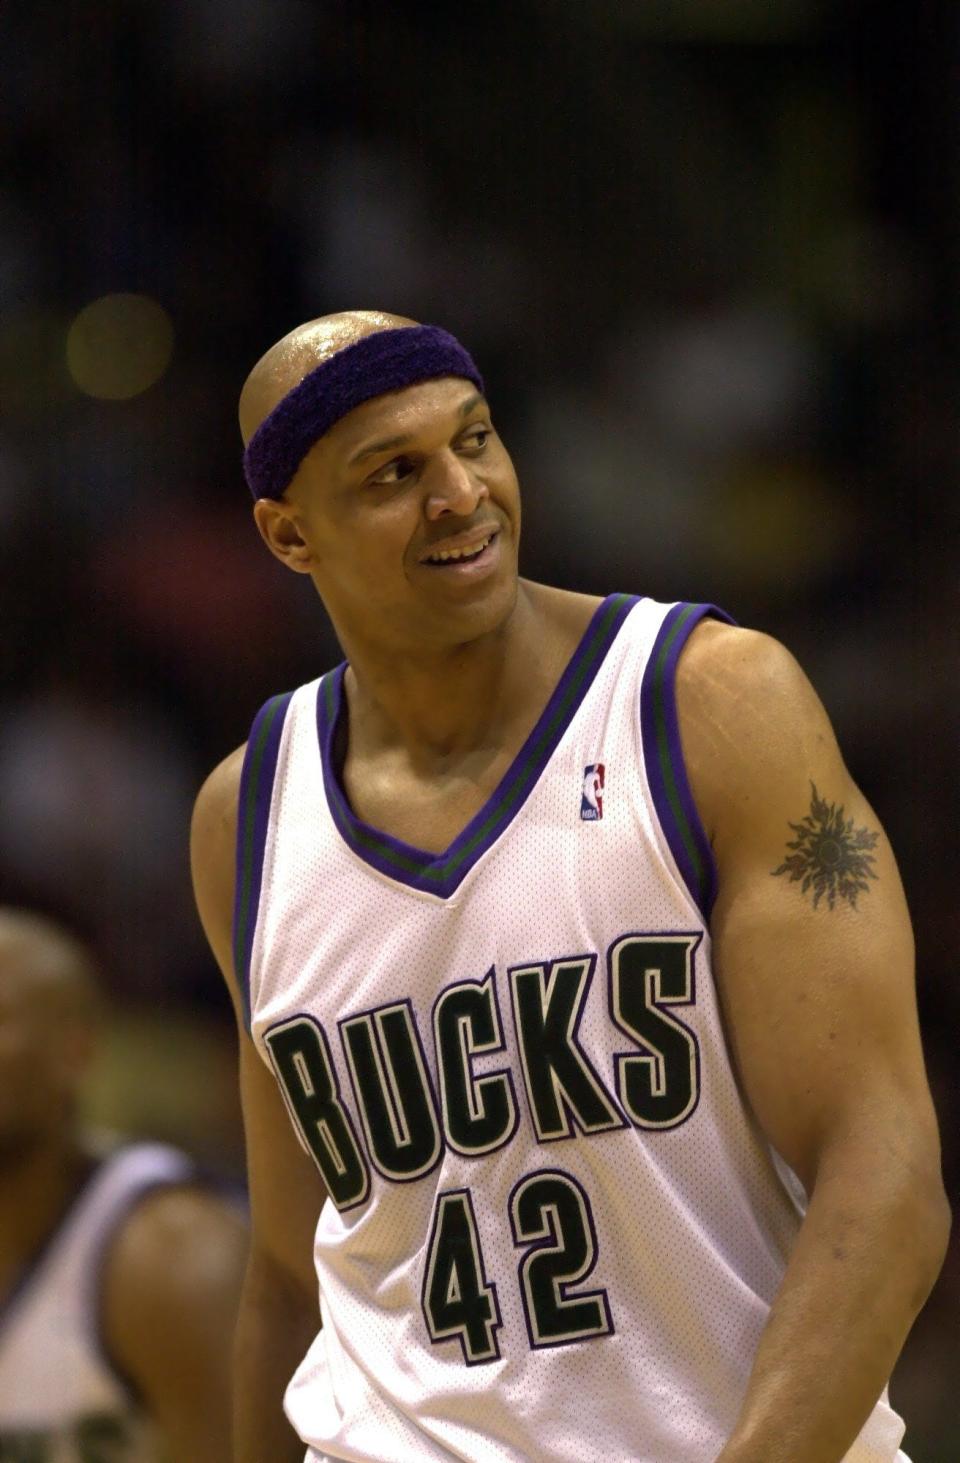 The Milwaukee Bucks Scott Williams played the Orlando Magic in the first round of the NBA playoffs on March 22, 2001.